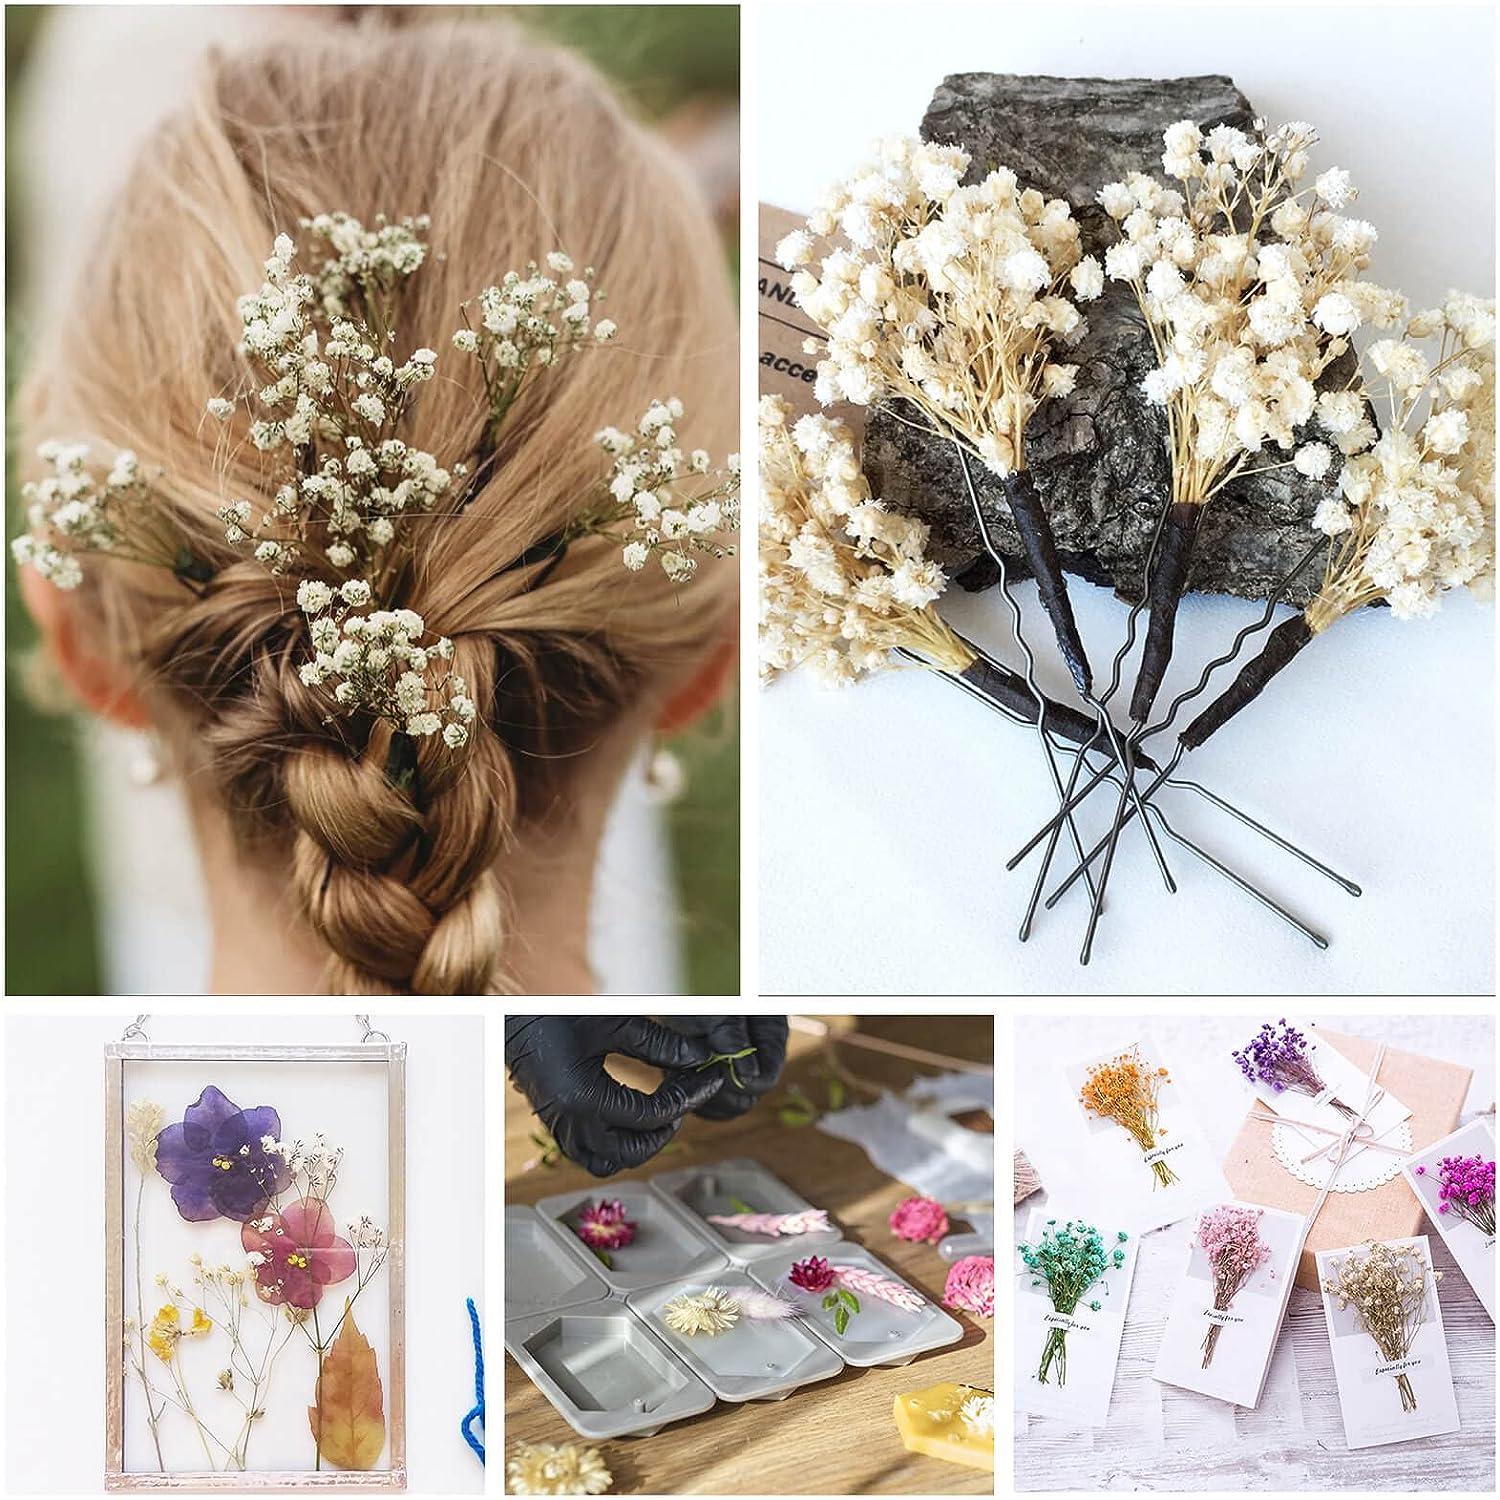 Dried Flowers Baby's Breath Bouquet - 3000+ Pure White Dried Babys